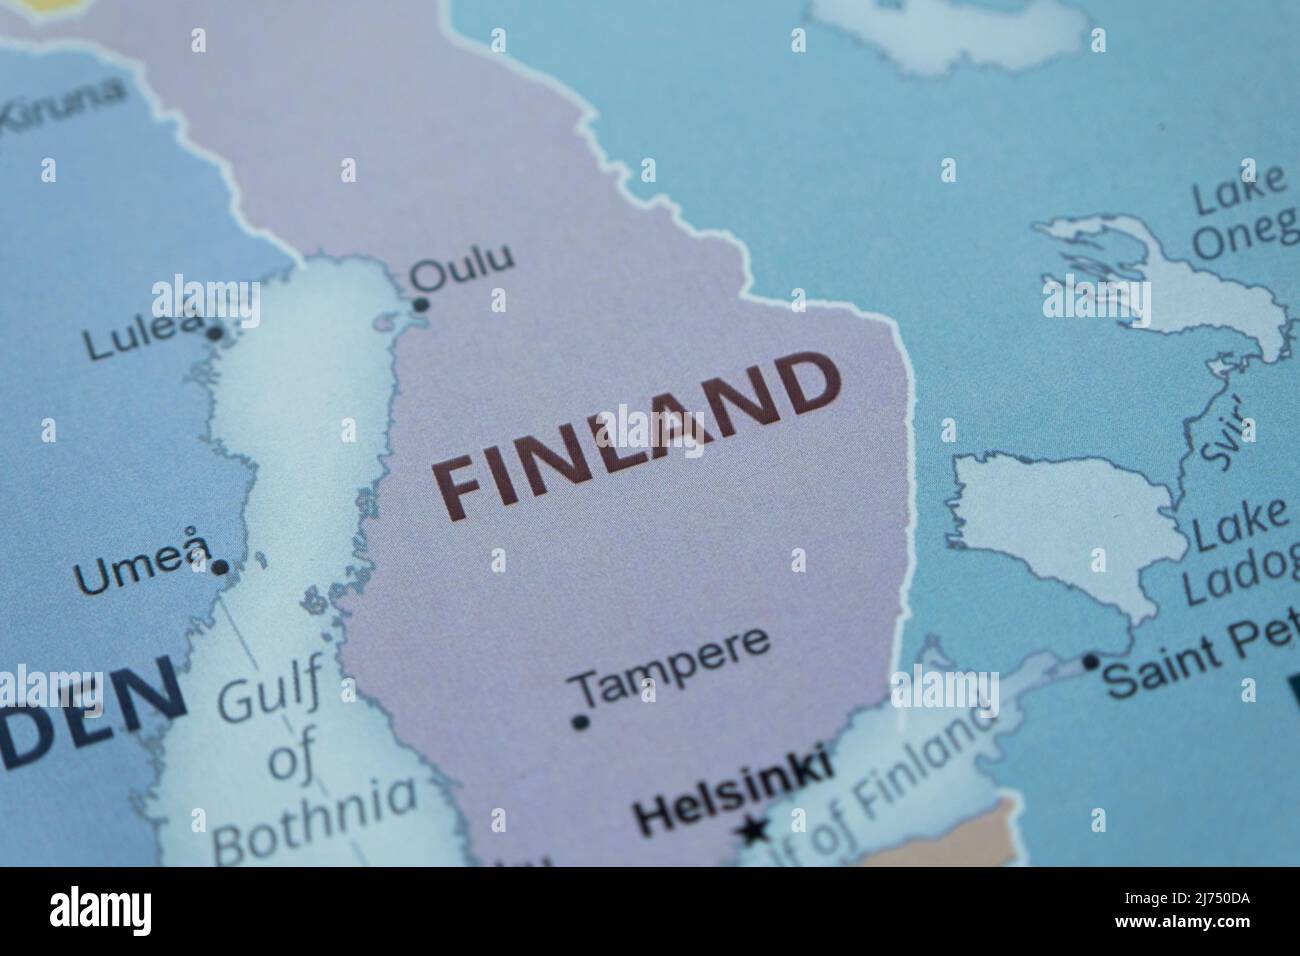 Finland country and location on map, macro shot and close-up of Finland on map, travel idea, vacation concept, Finn culture, North Europe destination Stock Photo